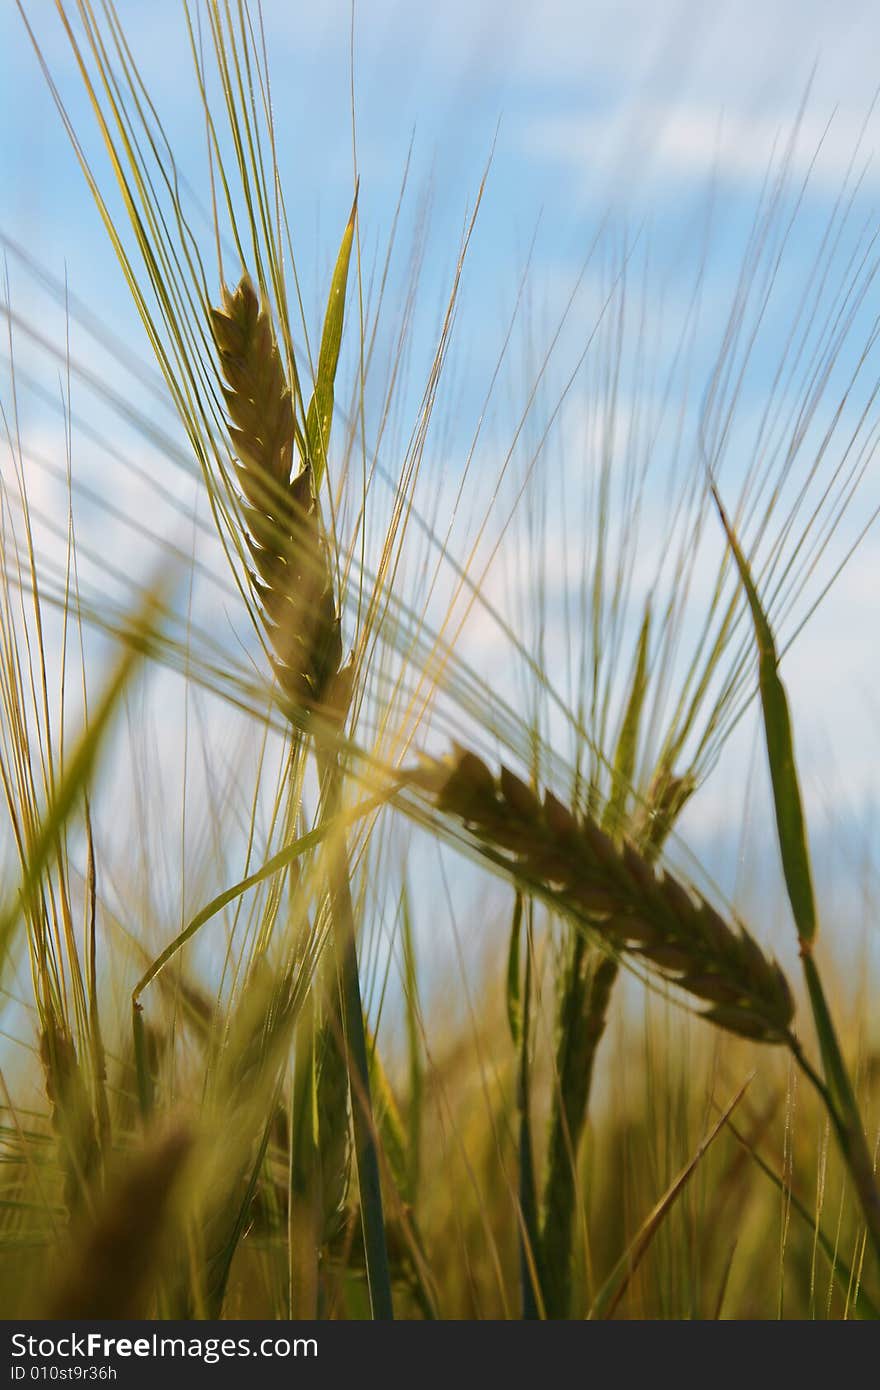 Ears of wheat against sky (agriculture)